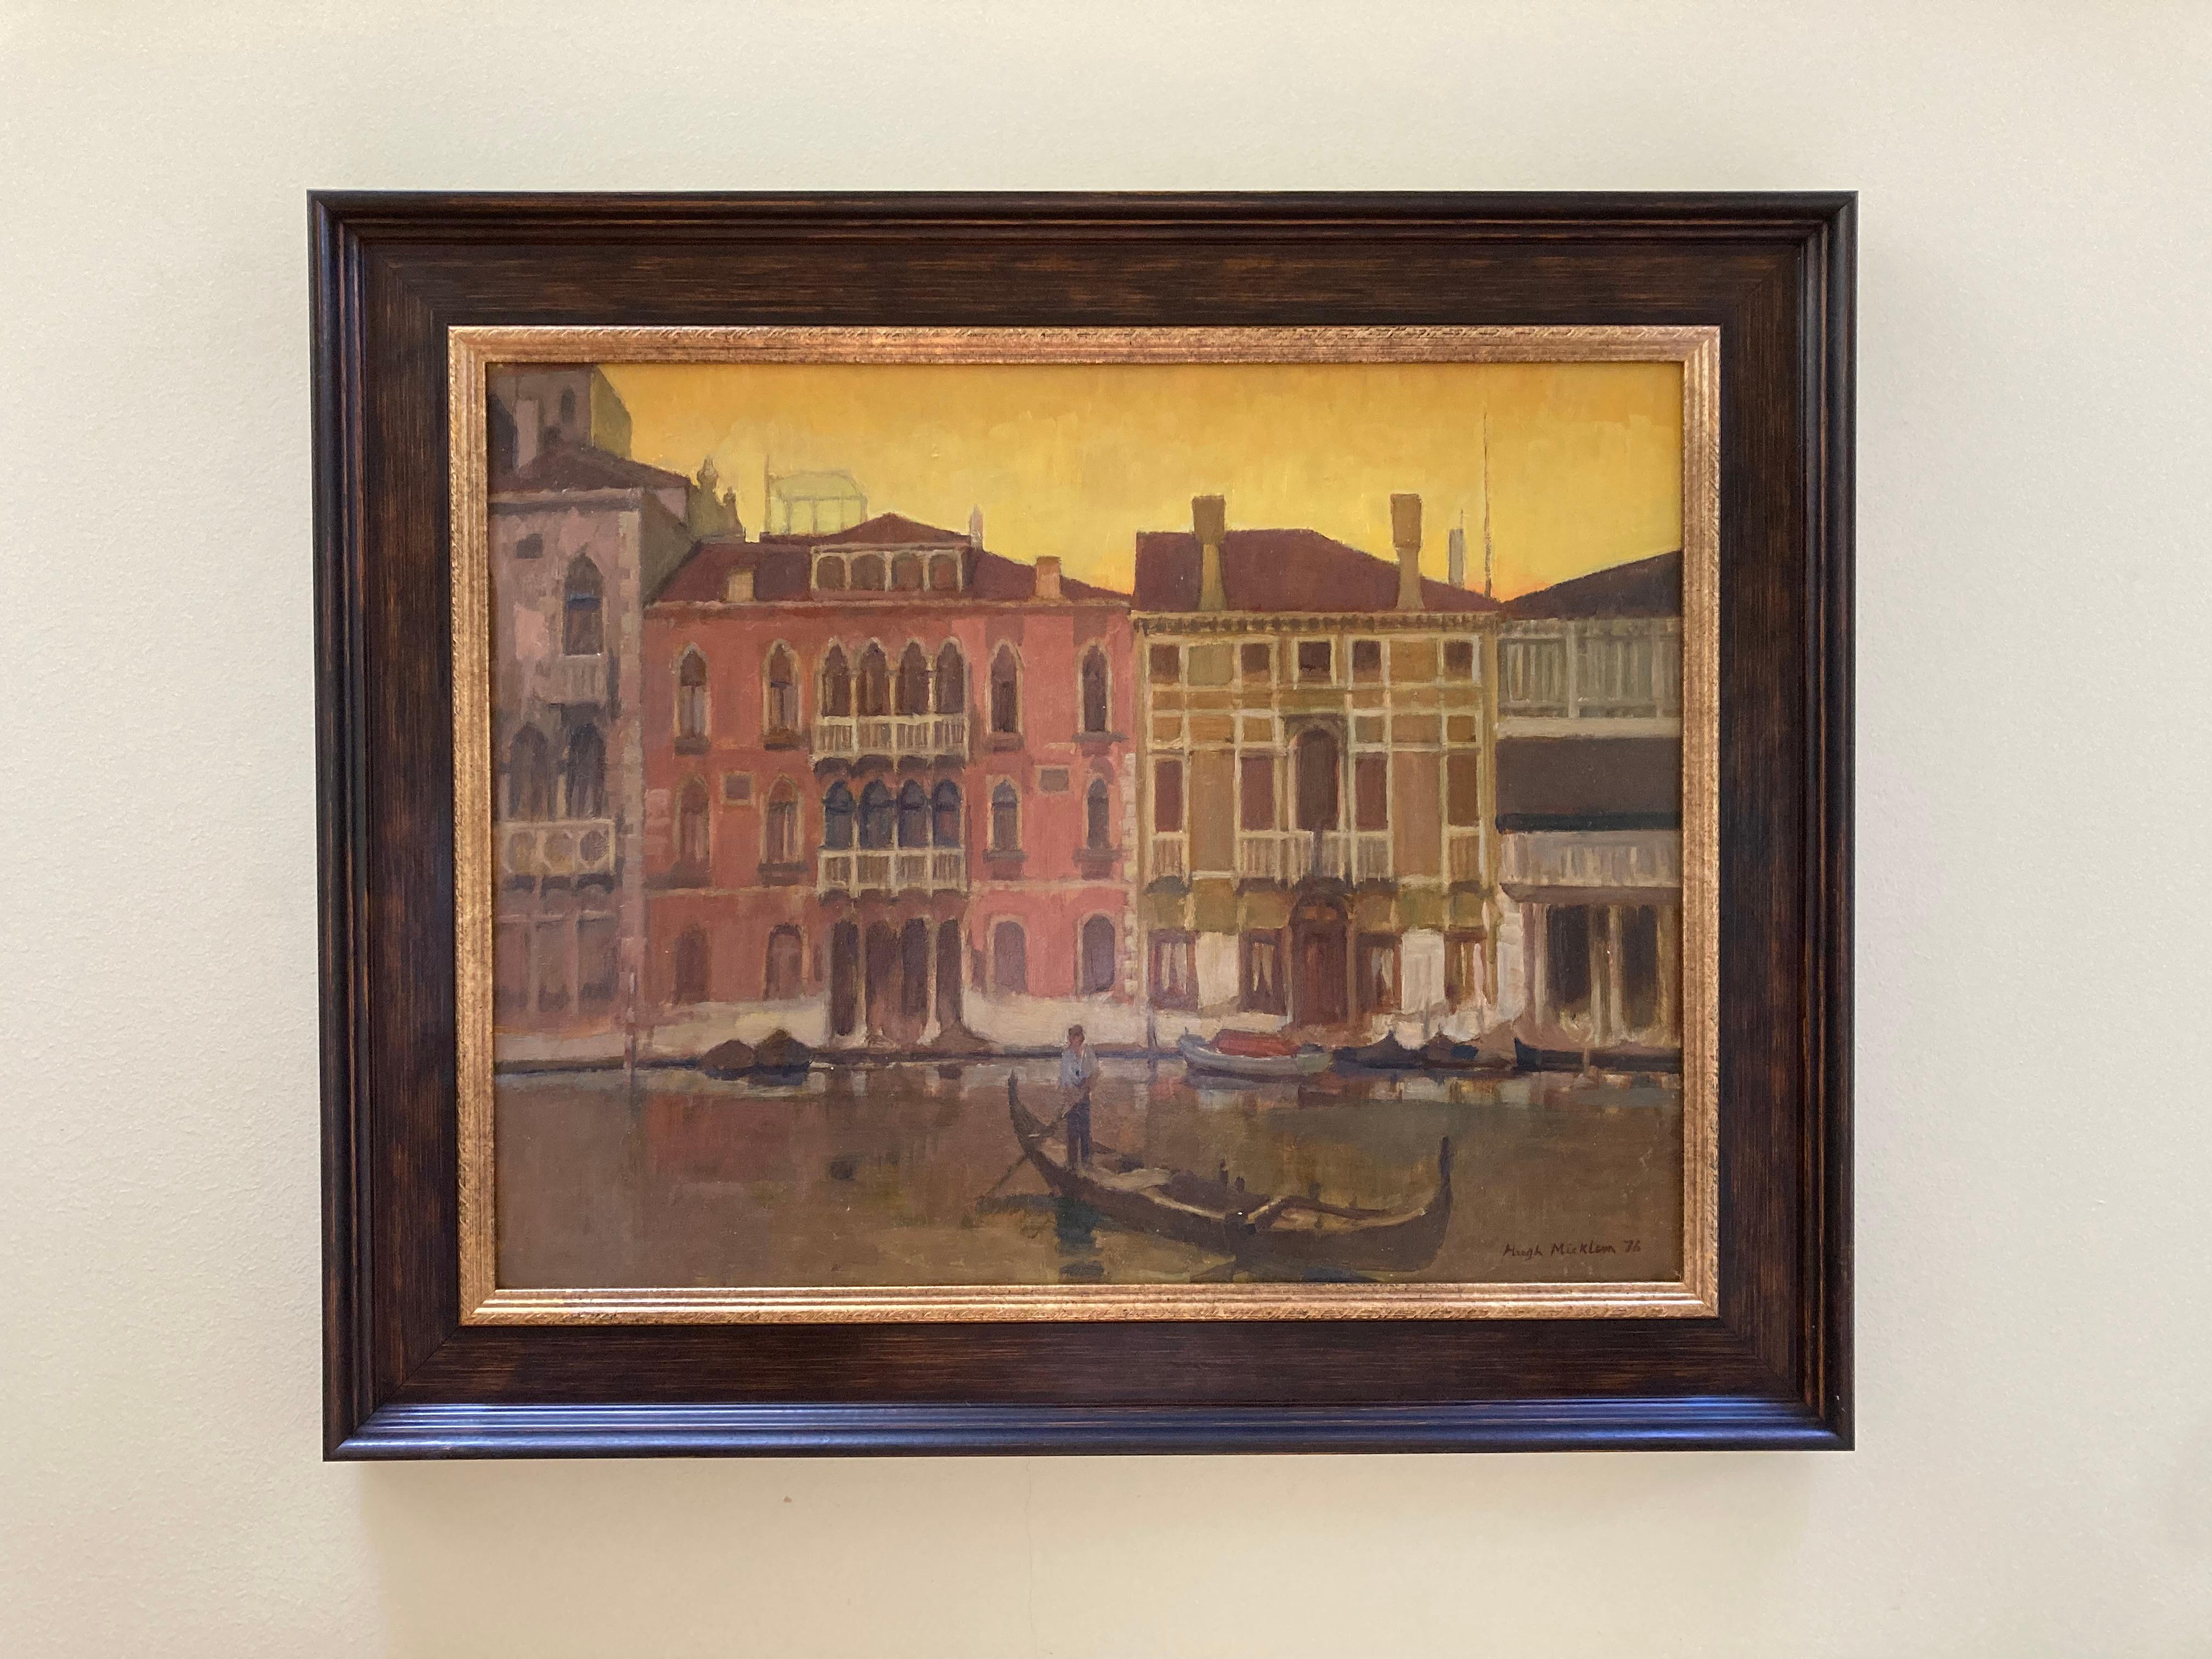 This charming view of Venice from the Grand Canal was painted by the British artist, Hugh Ralph Micklem in 1976.  painted in oils on board, size 16 x 20 inches, it is signed lower right and dated.  it was originally exhibited at the Arthur Jeffress